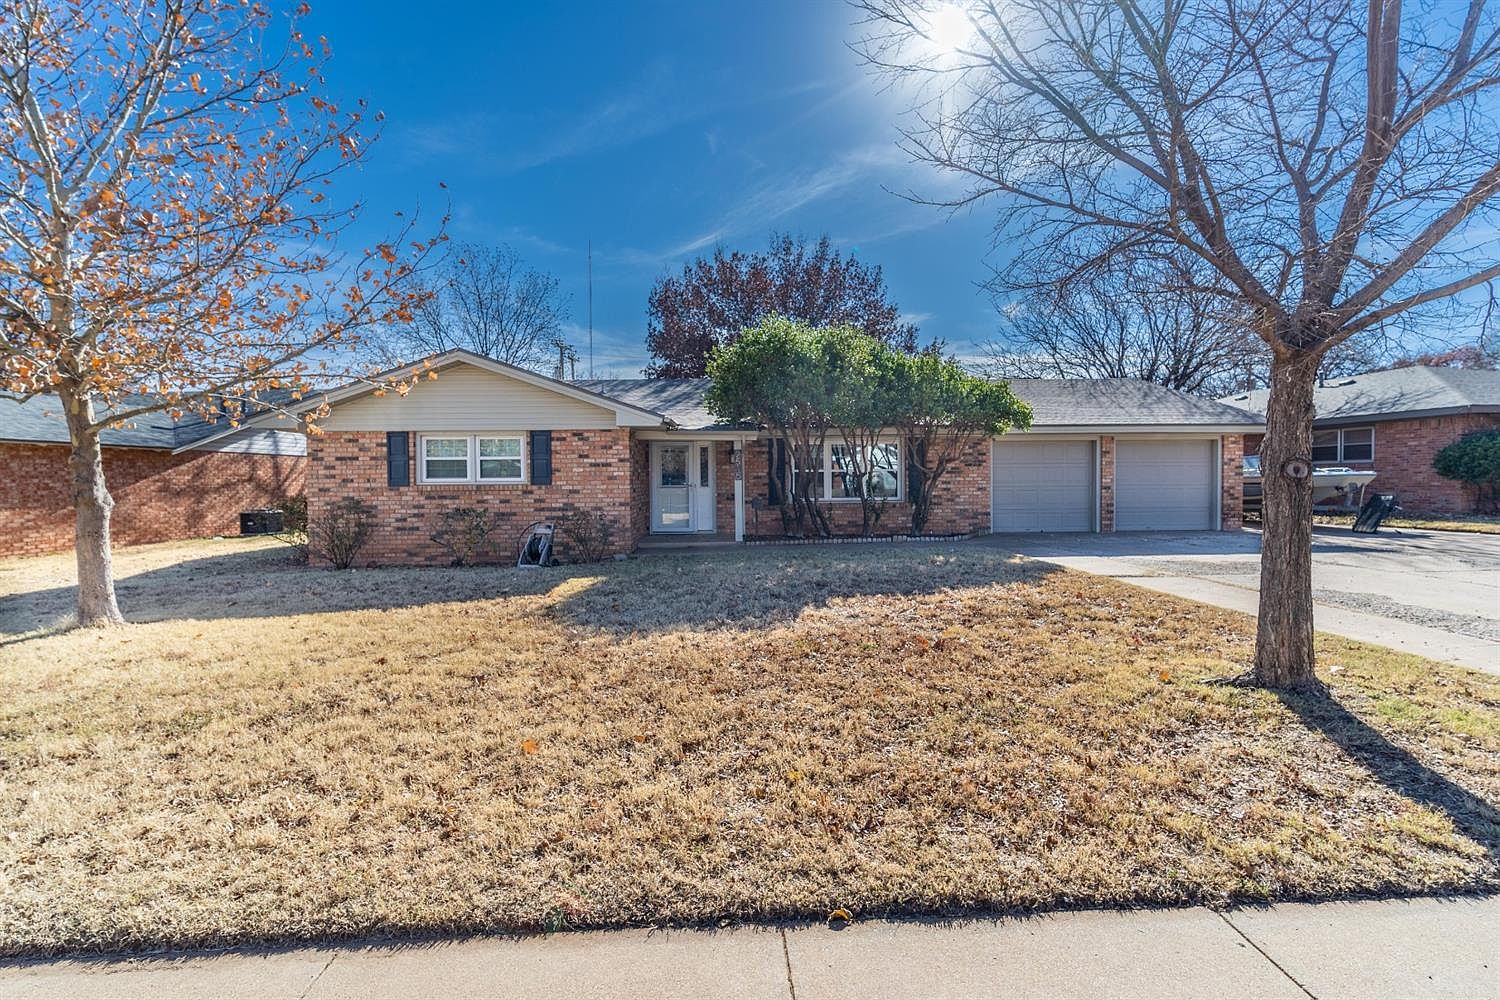 2515 69th St, Lubbock, TX 79413 | Zillow